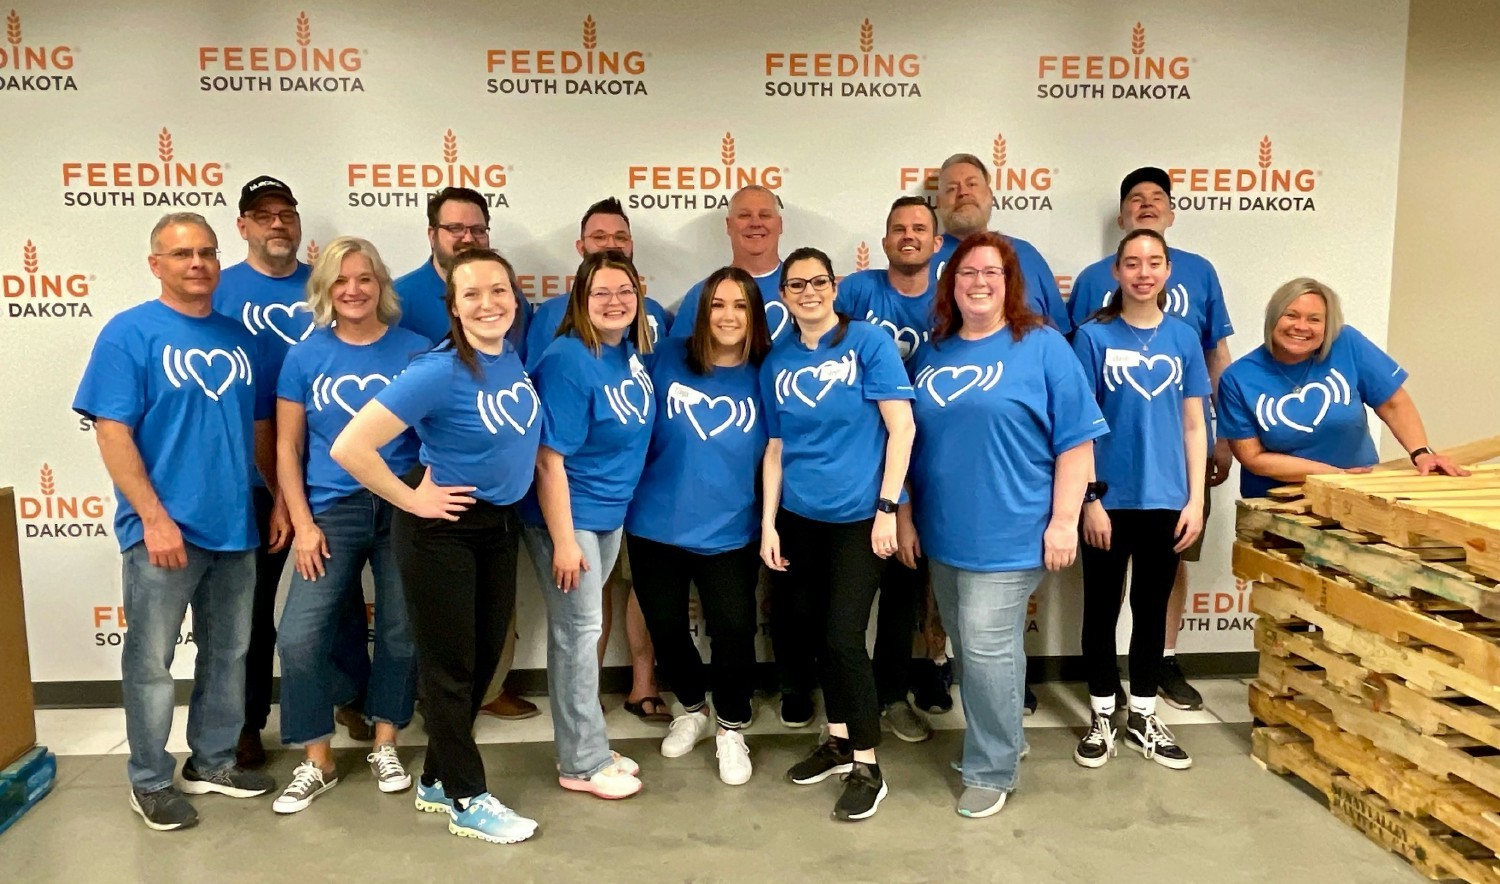 A team of 16 Bluepeakers pitched in to help feed those in need at Feeding South Dakota in Sioux Falls on April 12, 2023.